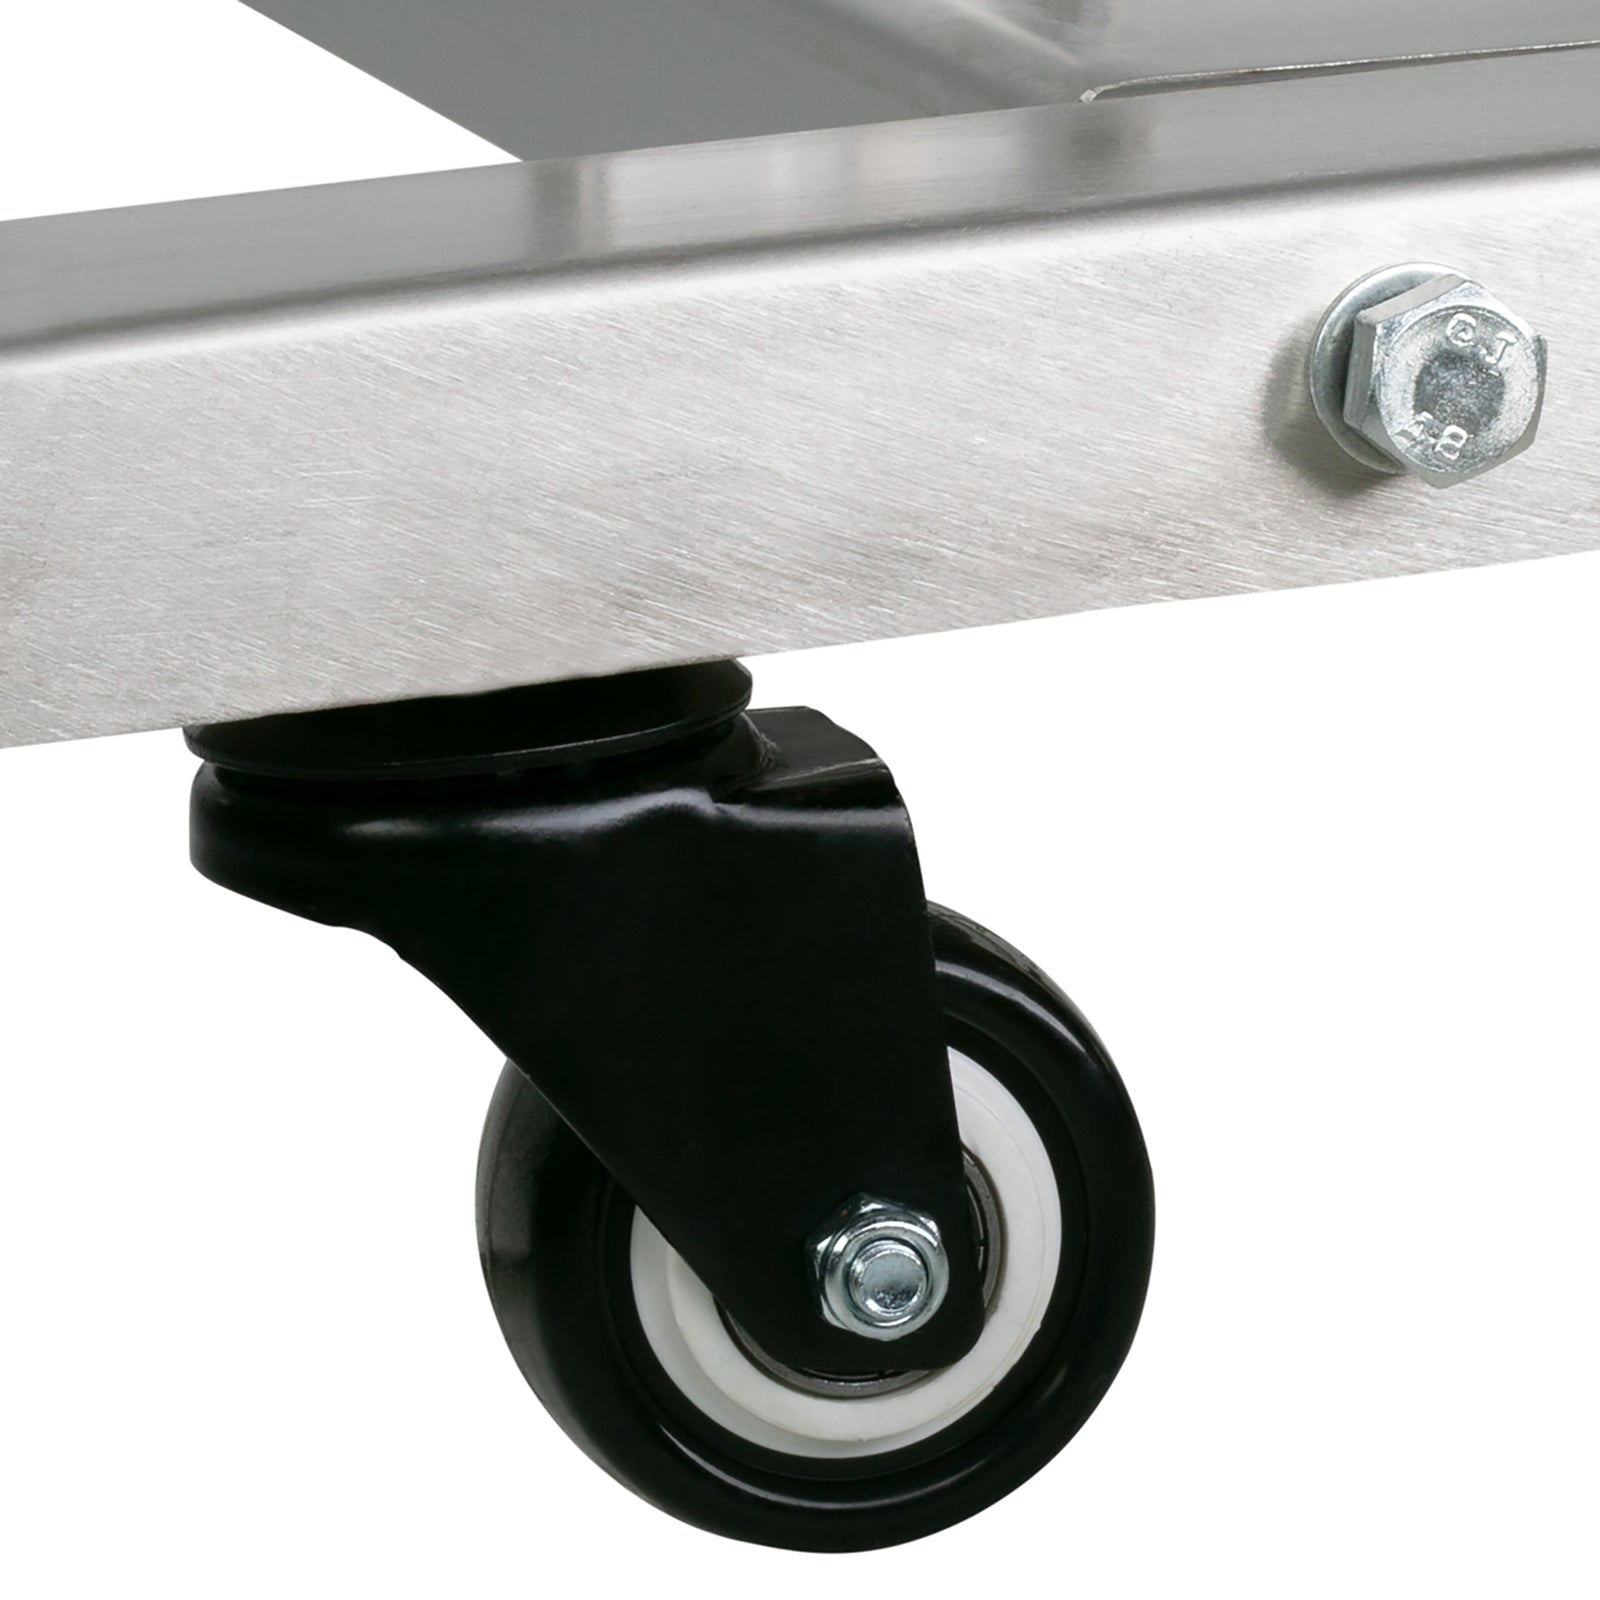 Black wheels of the stainless steel  stand